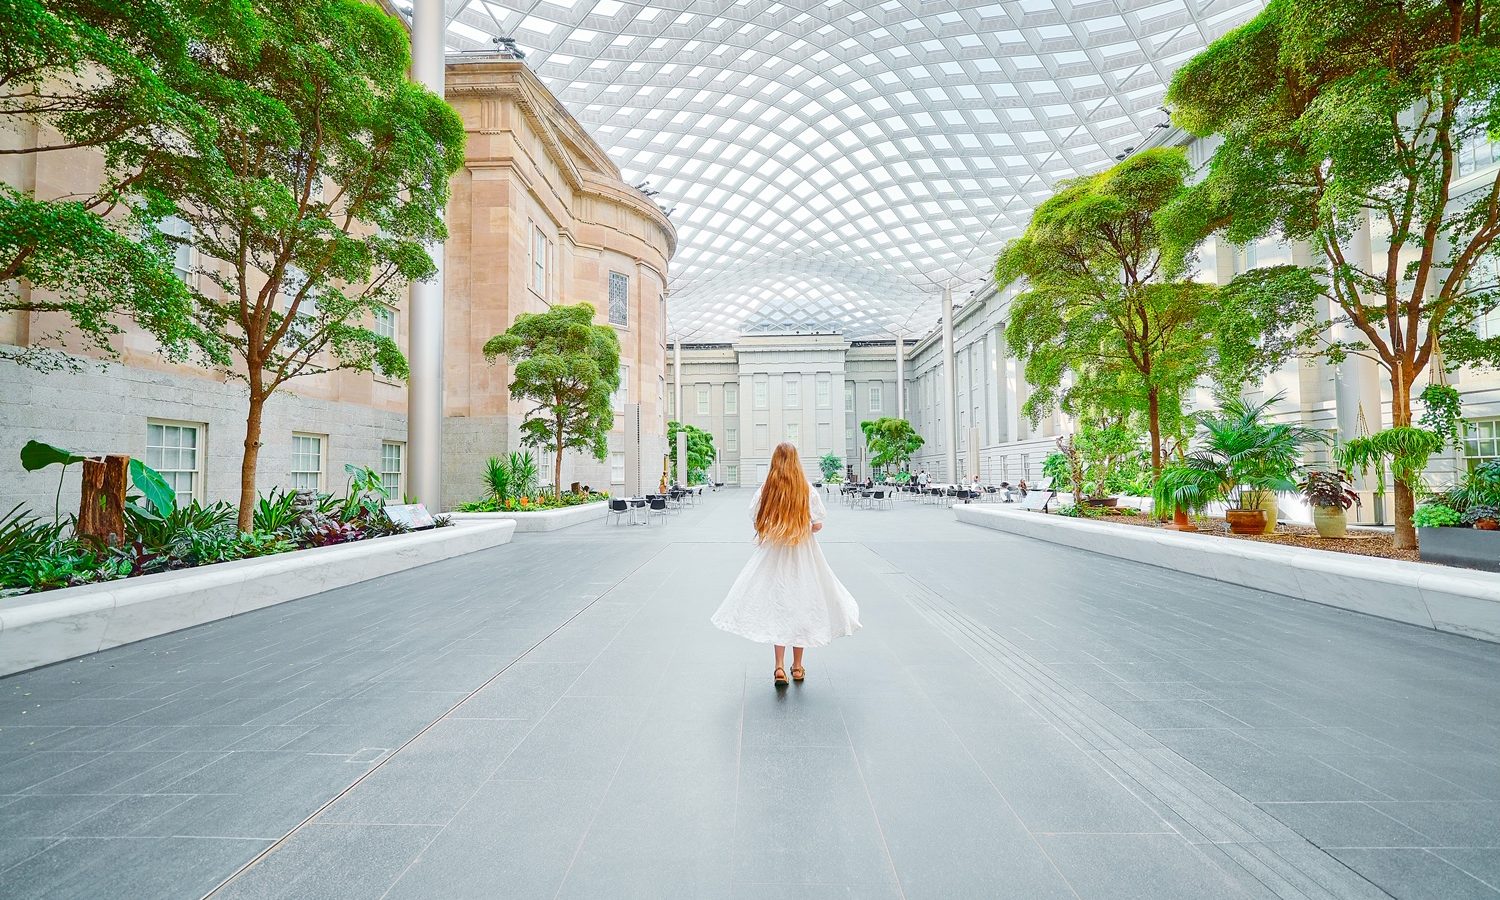 A woman in a white dress with long hair walking in the courtyard of the National Portrait Gallery, one of the best things to do in Washington DC. There are trees, shrubs, a wavy glass ceiling, and building facades.